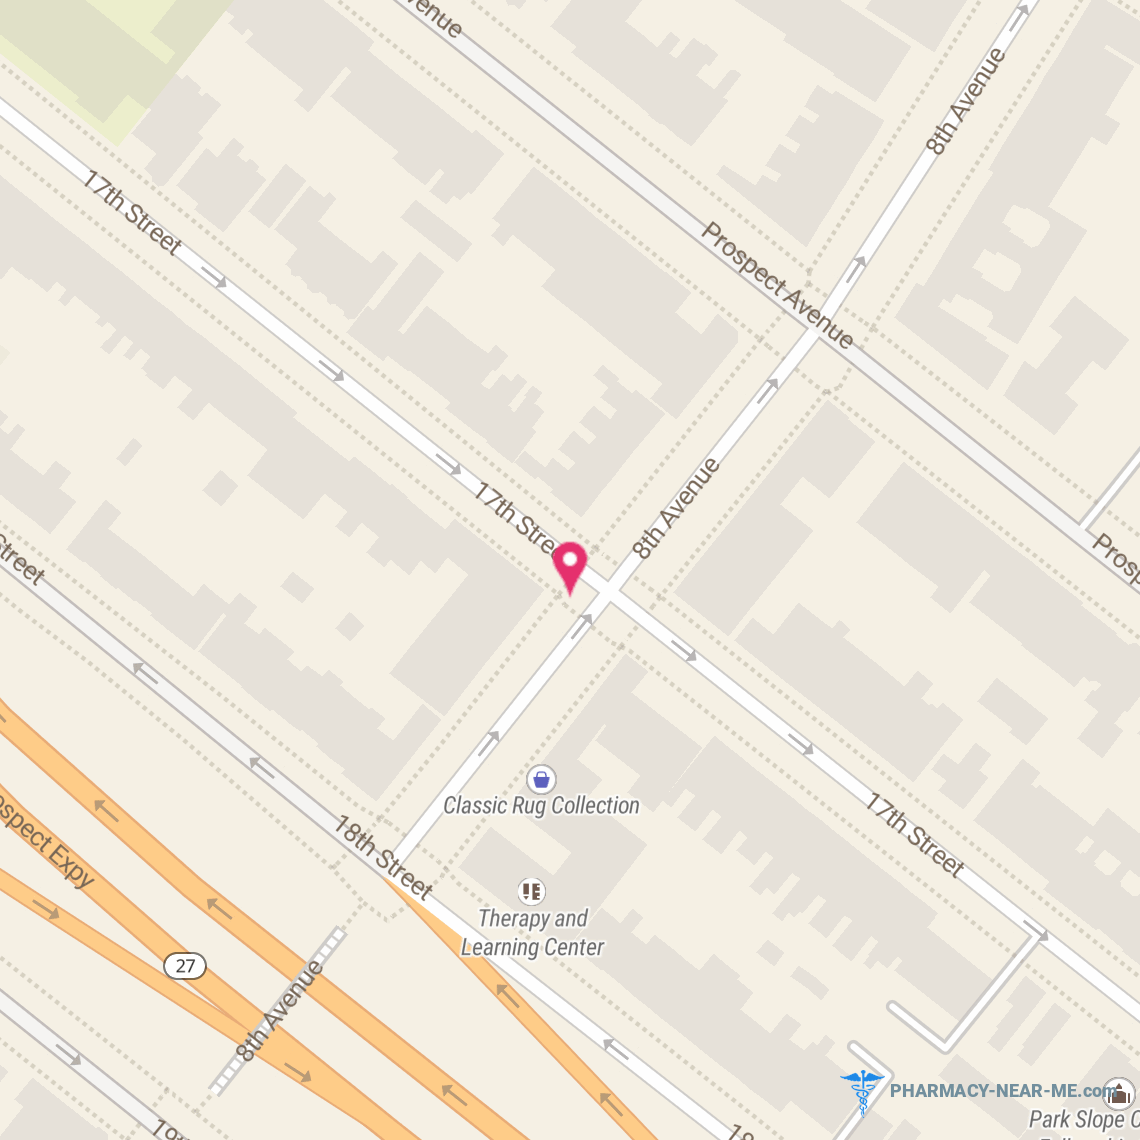 ALTHEALTH - Pharmacy Hours, Phone, Reviews & Information: 1702 8th Avenue, Brooklyn, New York 11215, United States